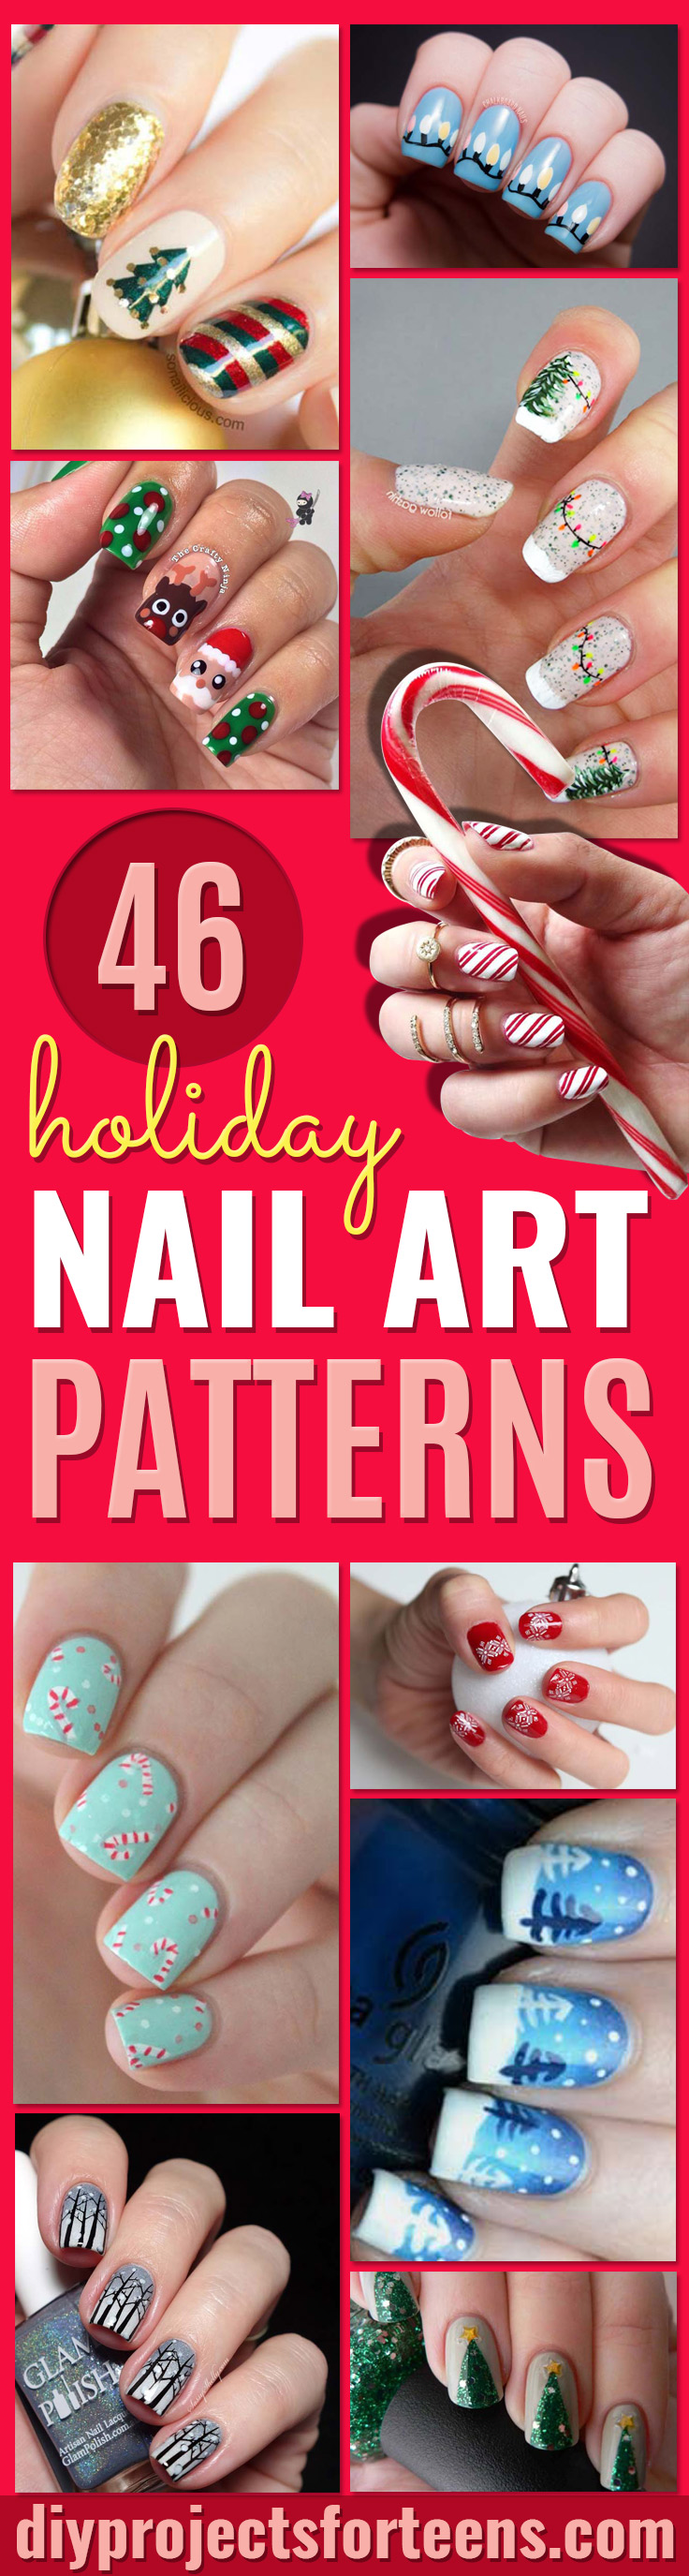 Cool DIY Nail Art Designs and Patterns for Christmas and Holidays -Do It Yourself Manicure Ideas With Christmas Trees, Candy Canes, Snowflakes and Glittery Designs for Holiday Nails - Step by Step Tutorials and Instructions #nailart #christmasnails #naildesigns